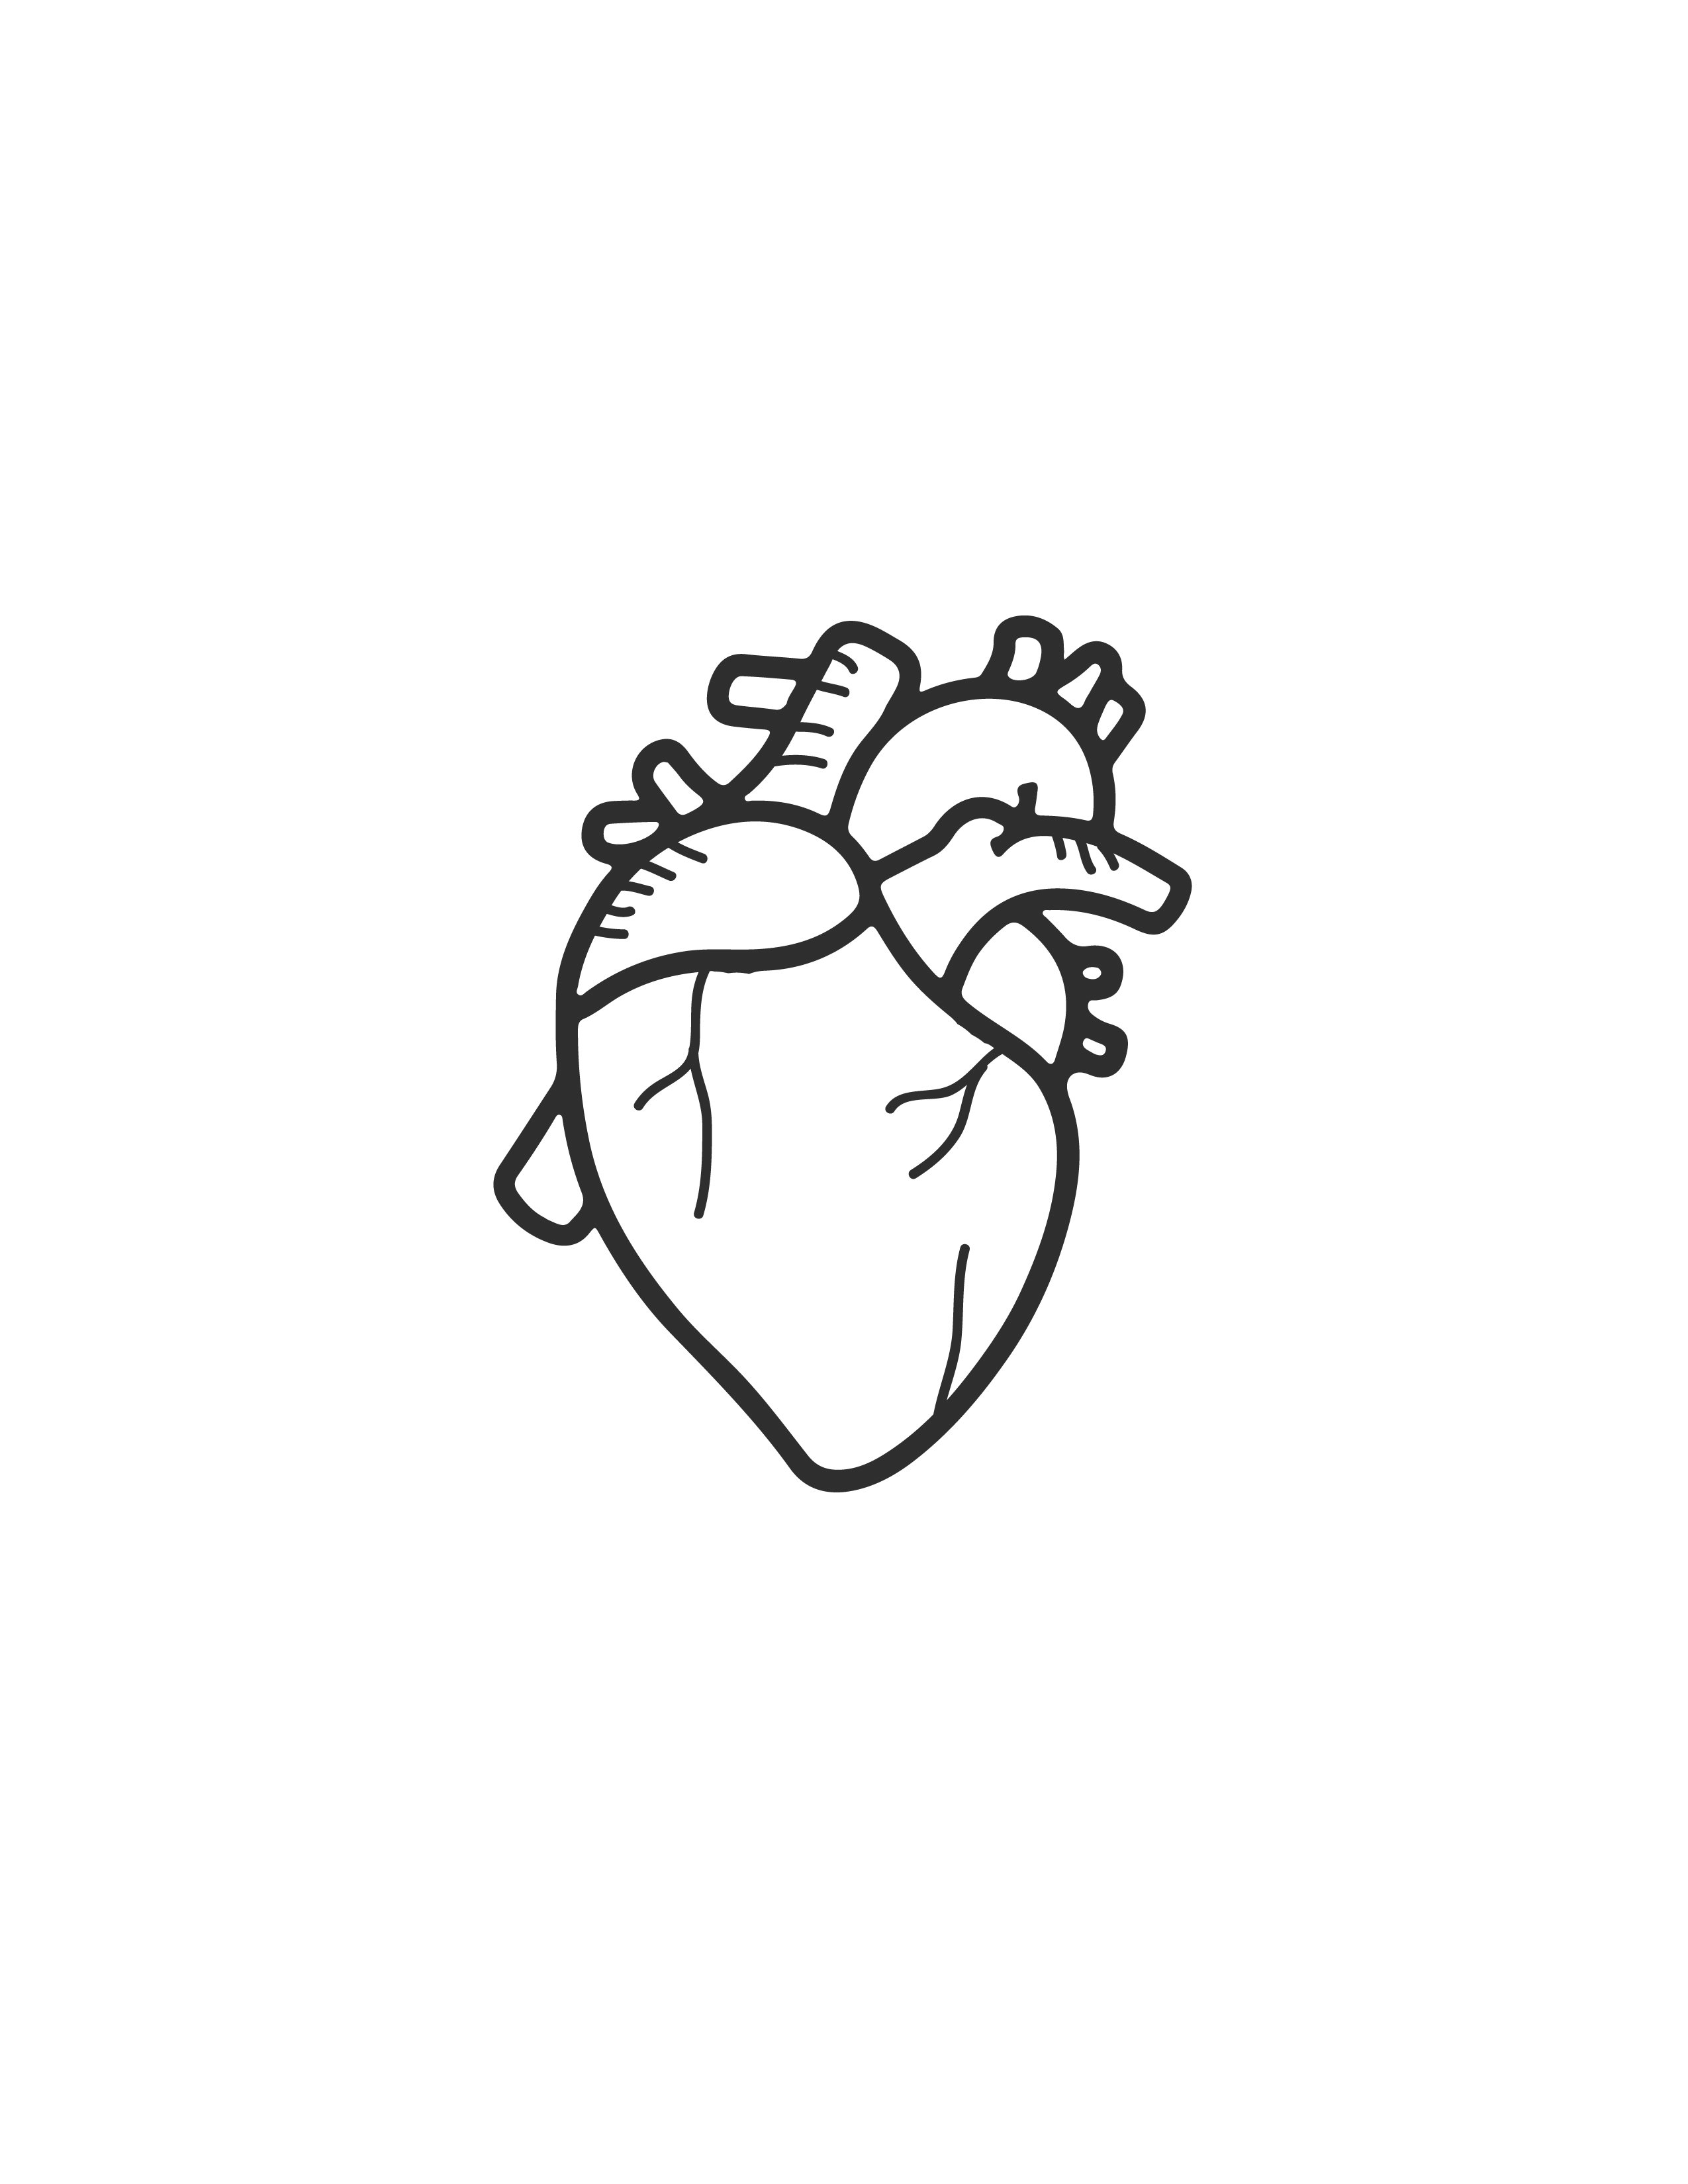 human heart drawing outline